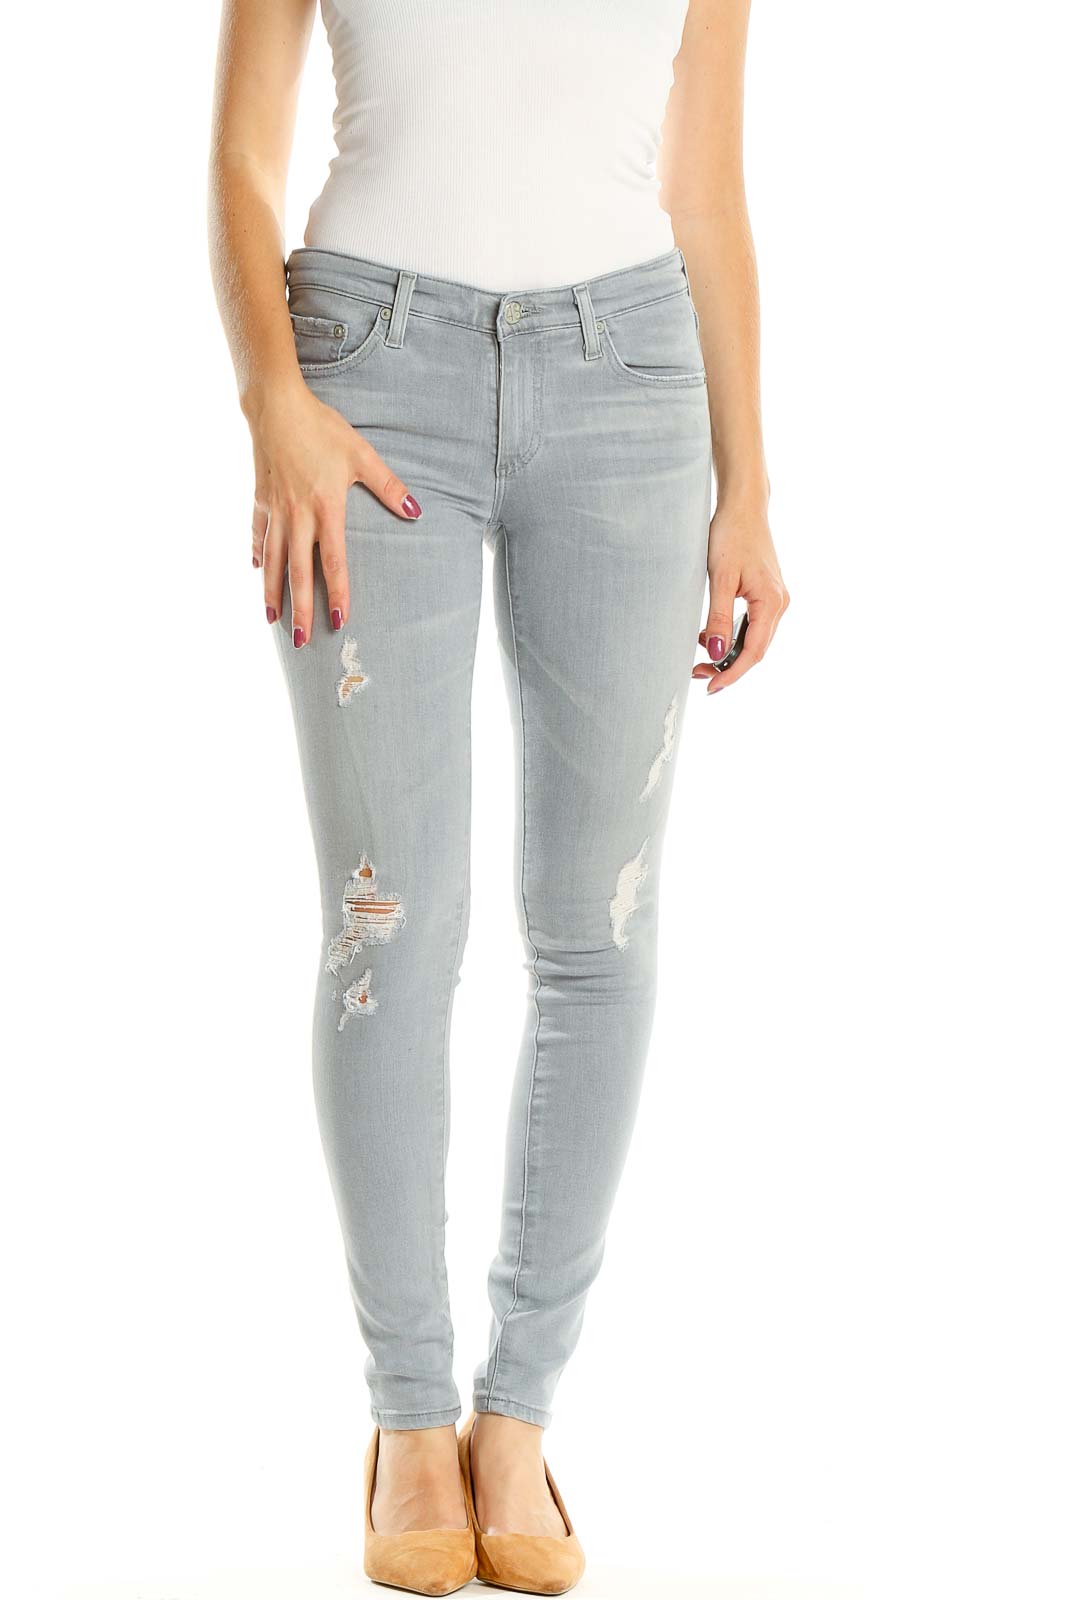 Gray Distressed Skinny Jeans Front